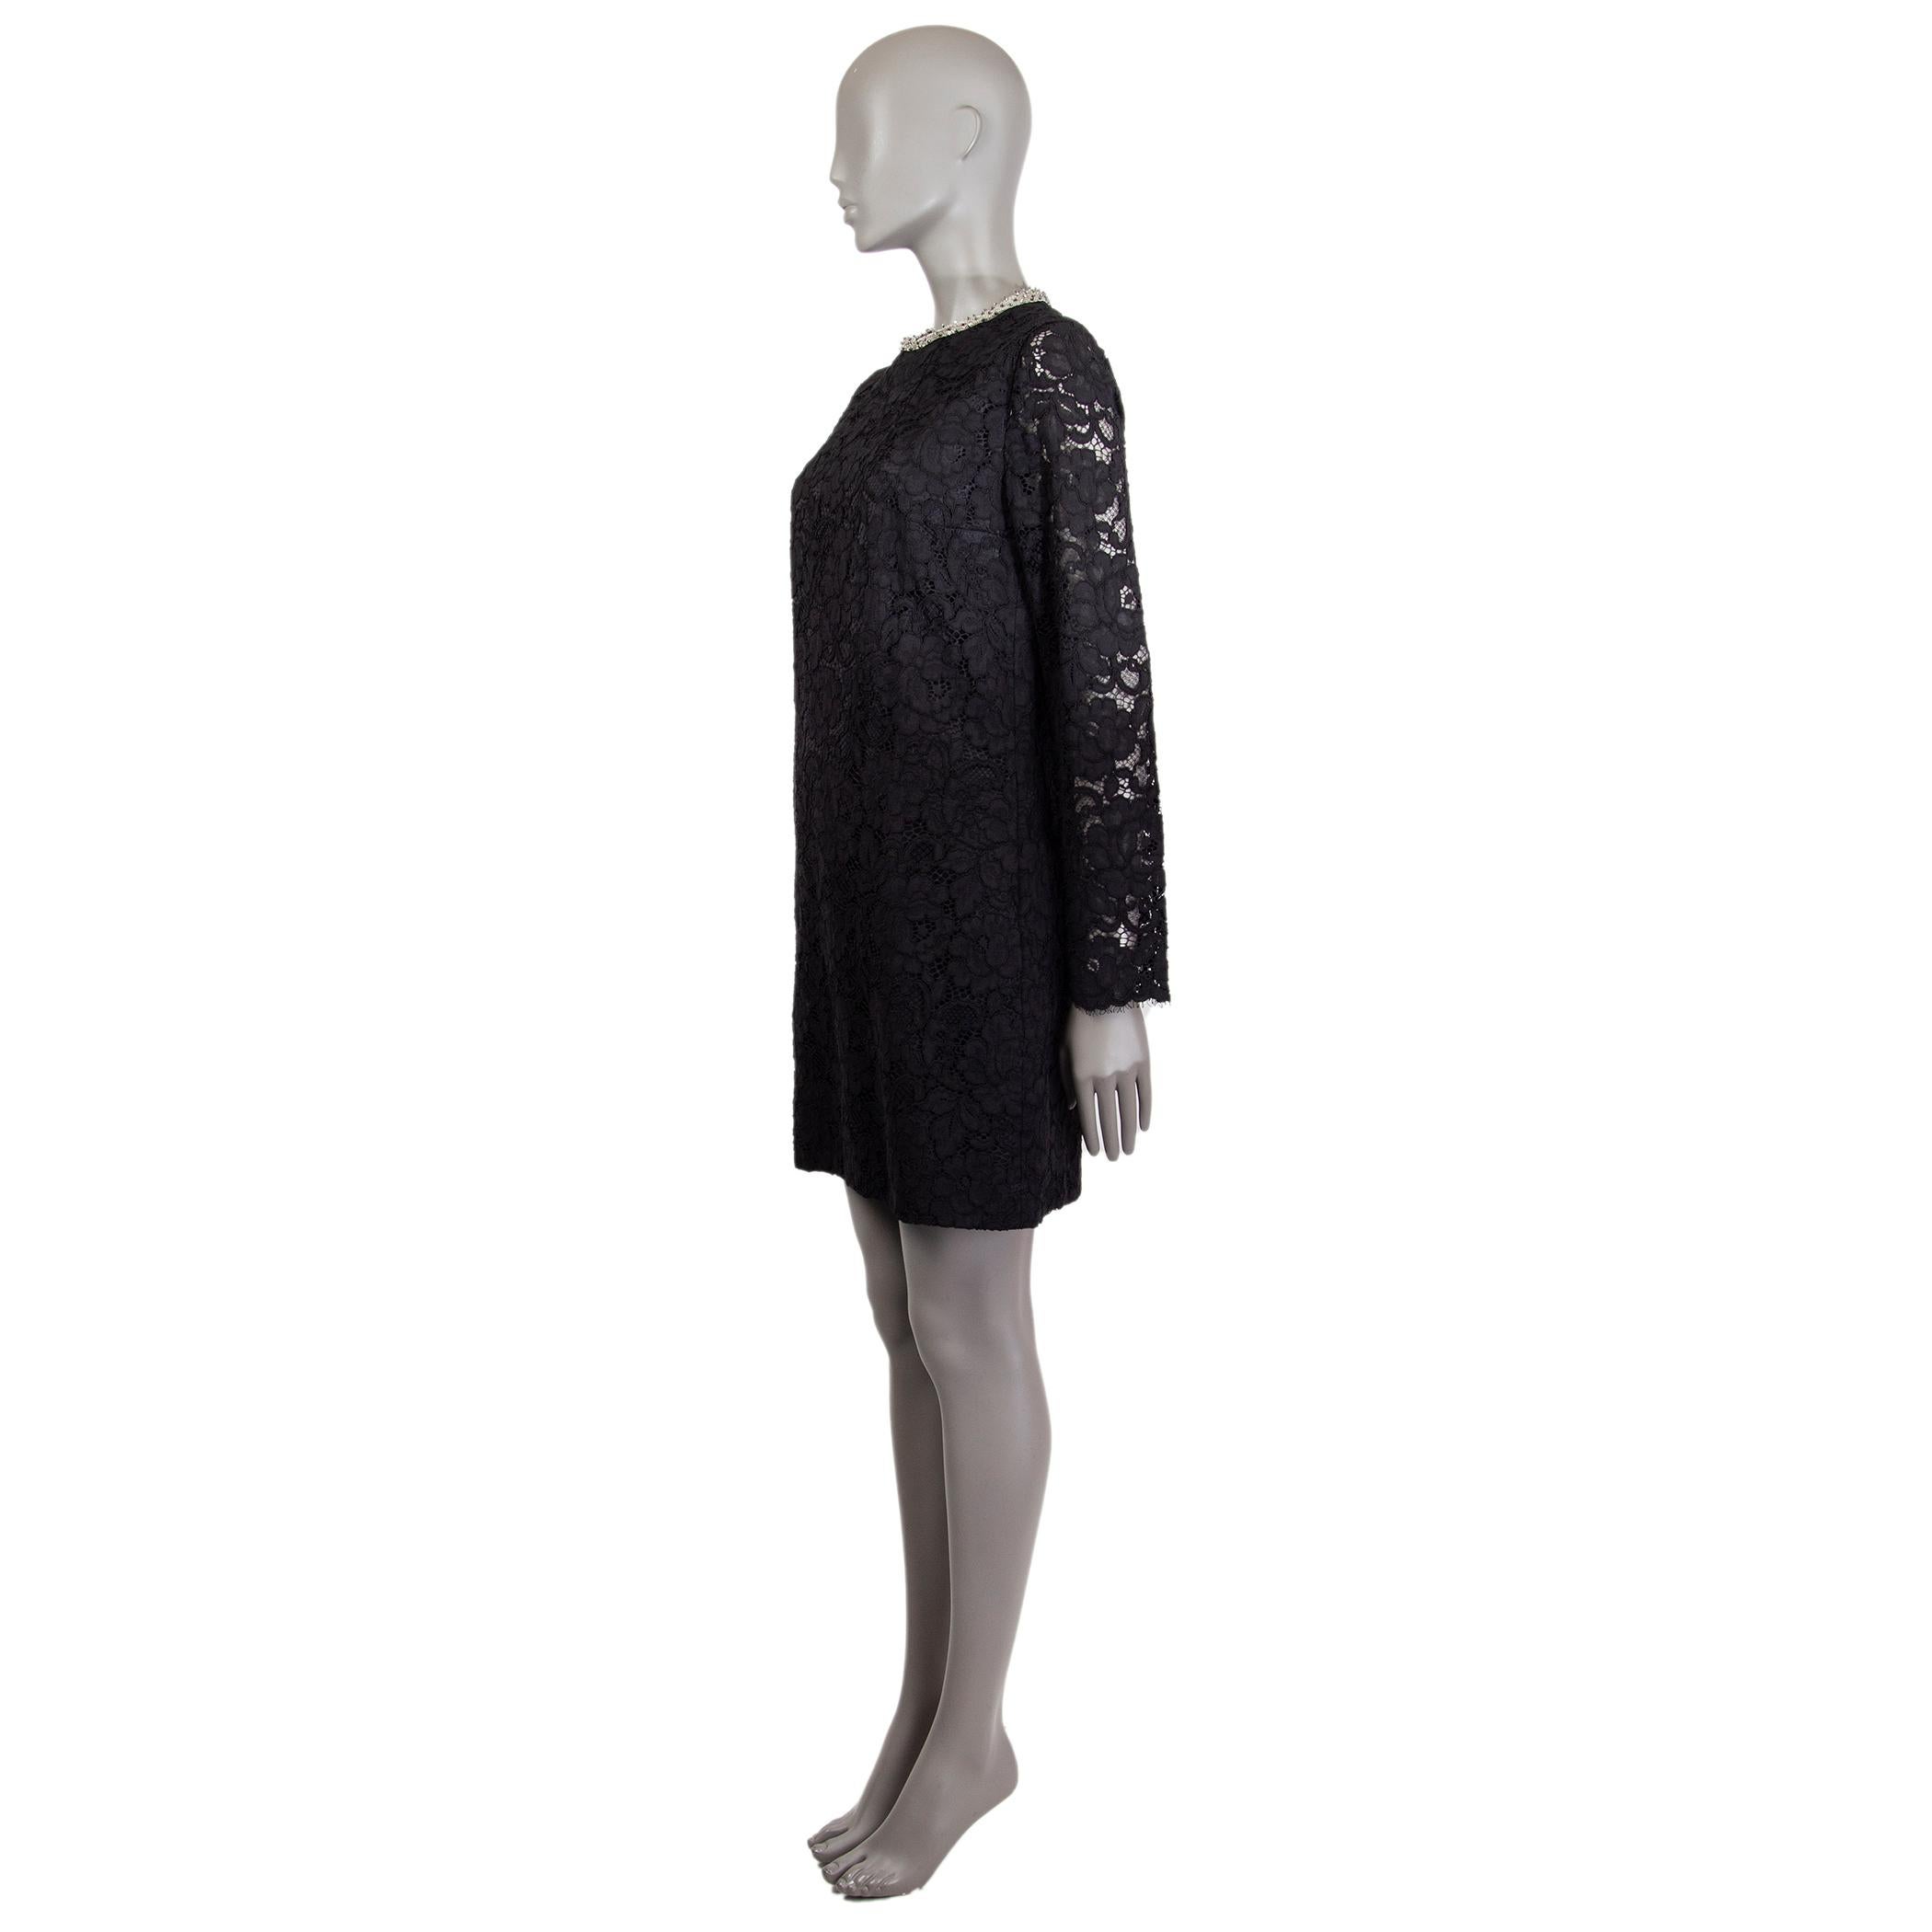 Saint Laurent long-sleeve lace dress in black cotton (44%), nylon (23%), viscose (17%), and modal (16%). With beaded crew neck. Closes with invisible zipper on the back. Lined in black silk (100%). Has been worn and is in excellent condition. 

Tag